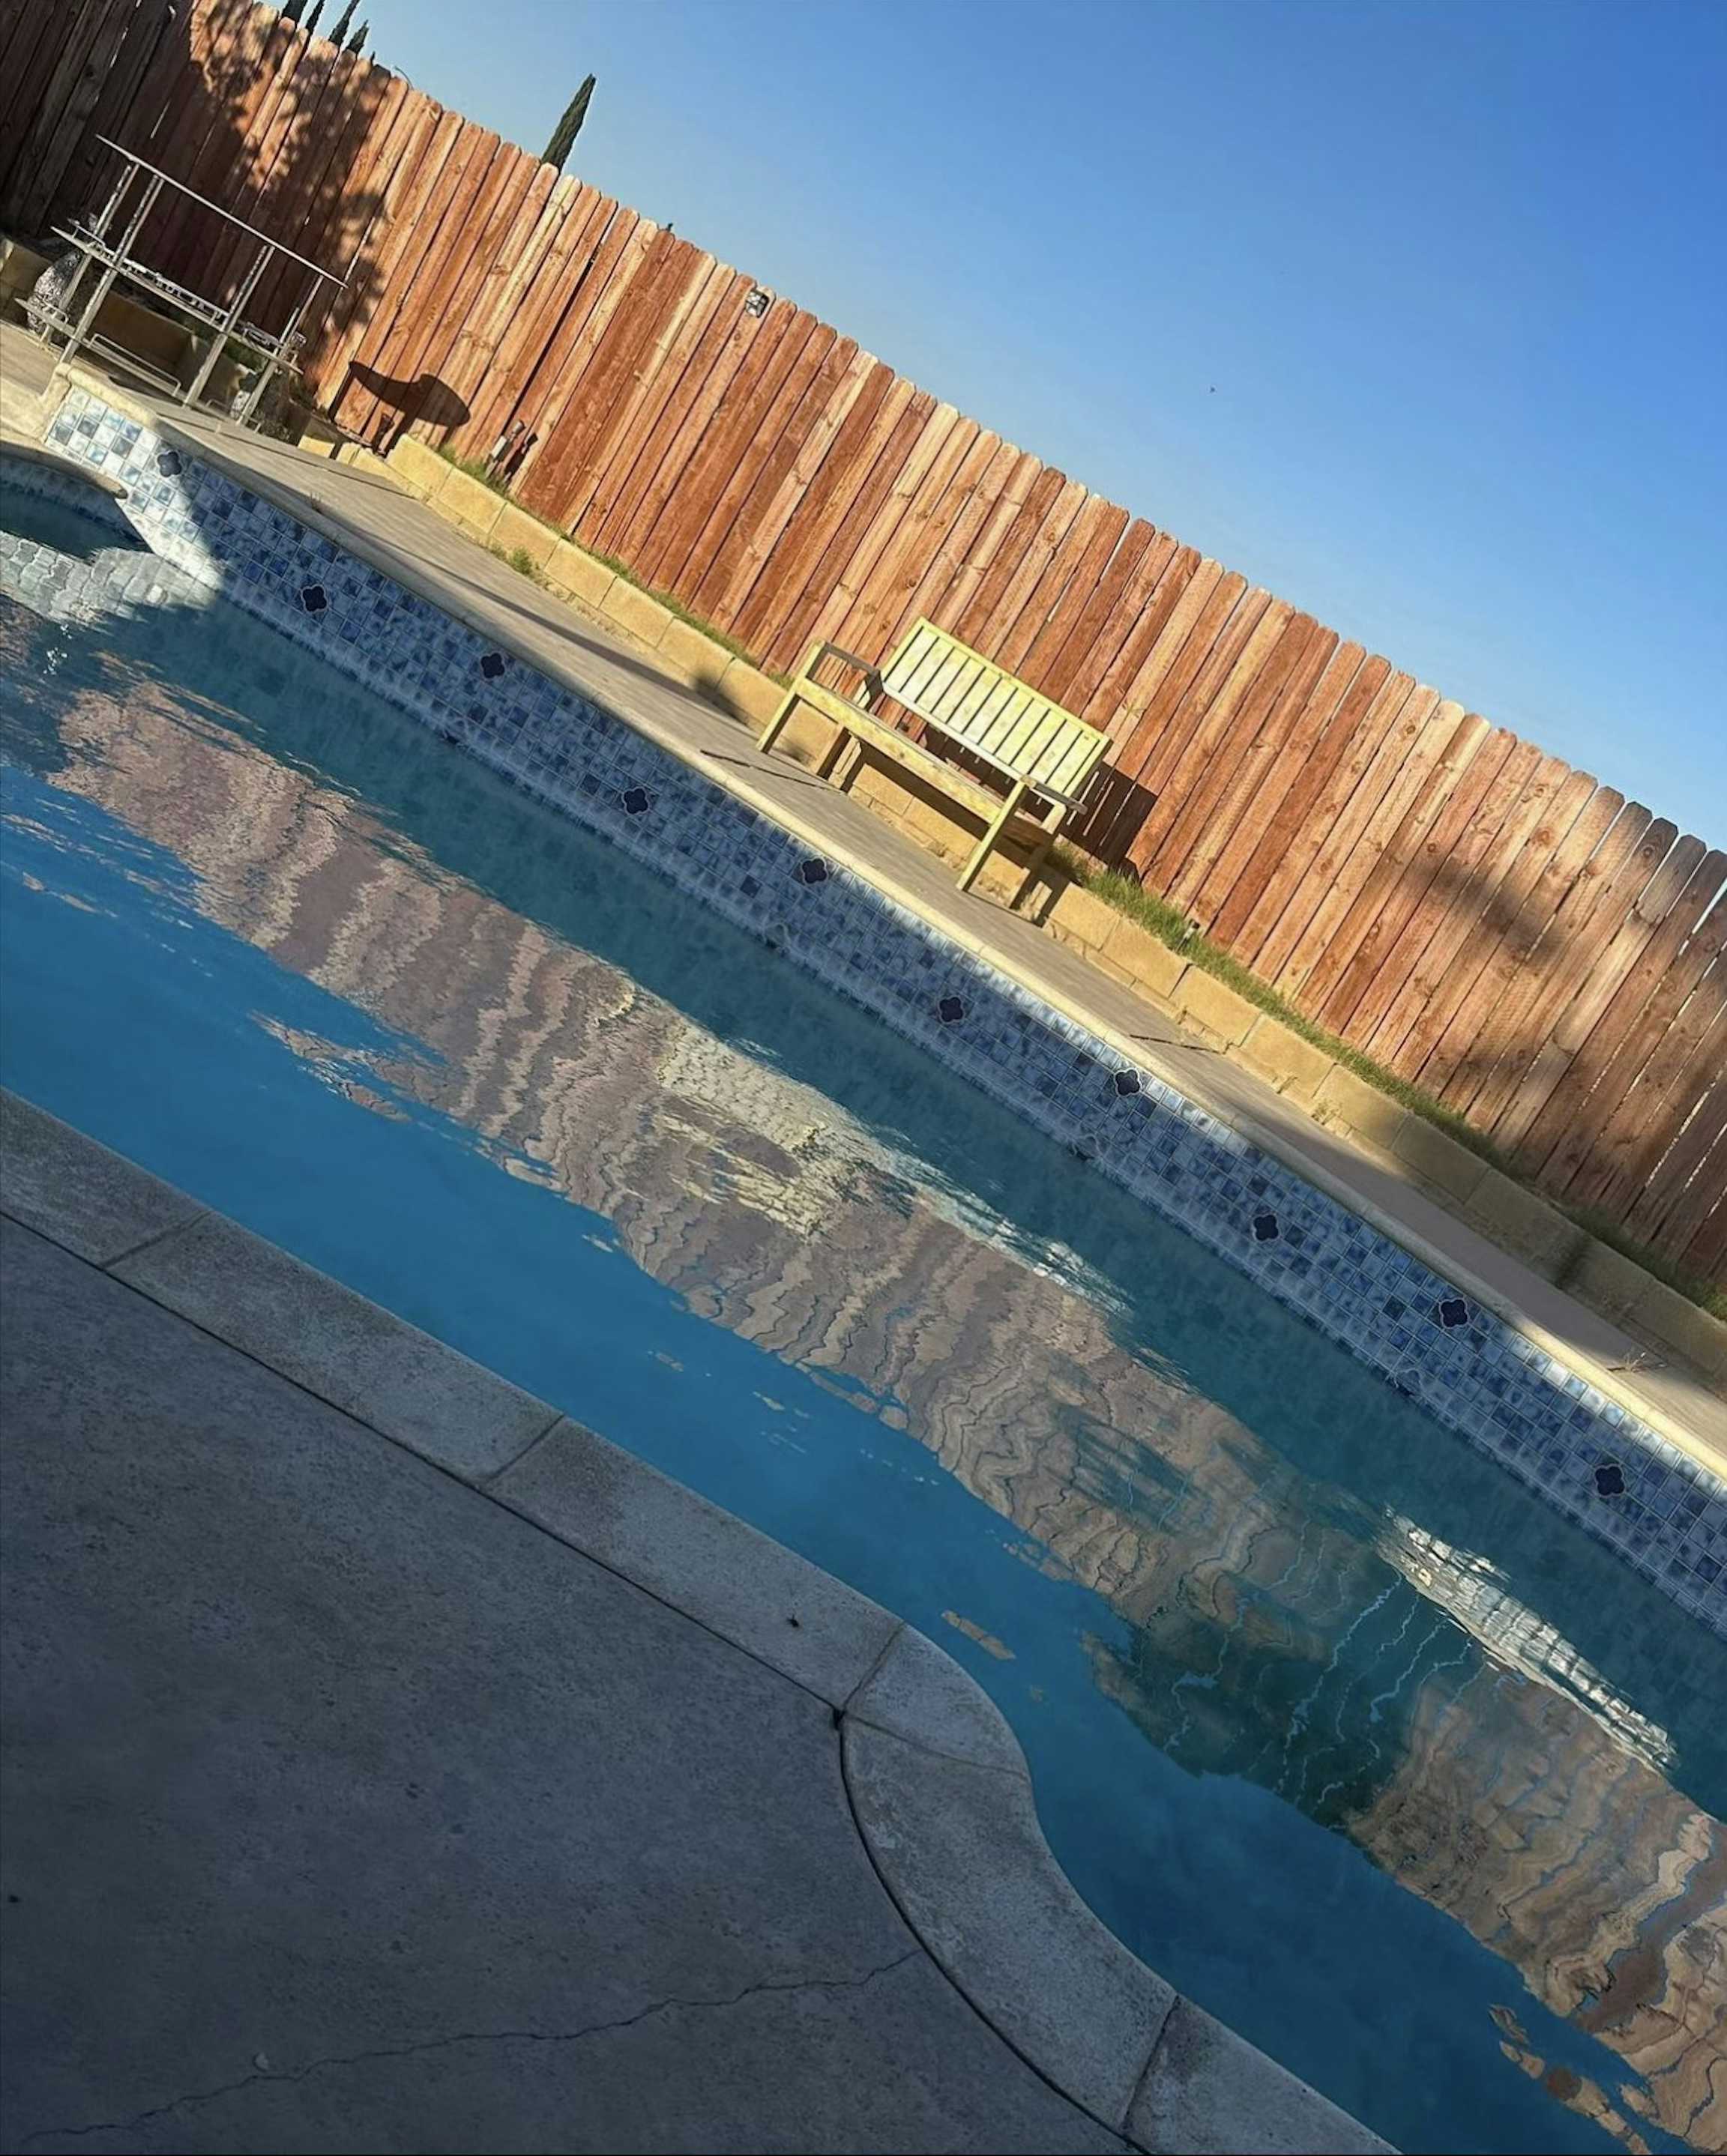 Tired of the local pools? Enjoy night swimming? On a budget and need a last  minute pool or meeting area come and enjoy this budget friendly backyard  entertainment area - Private Pool